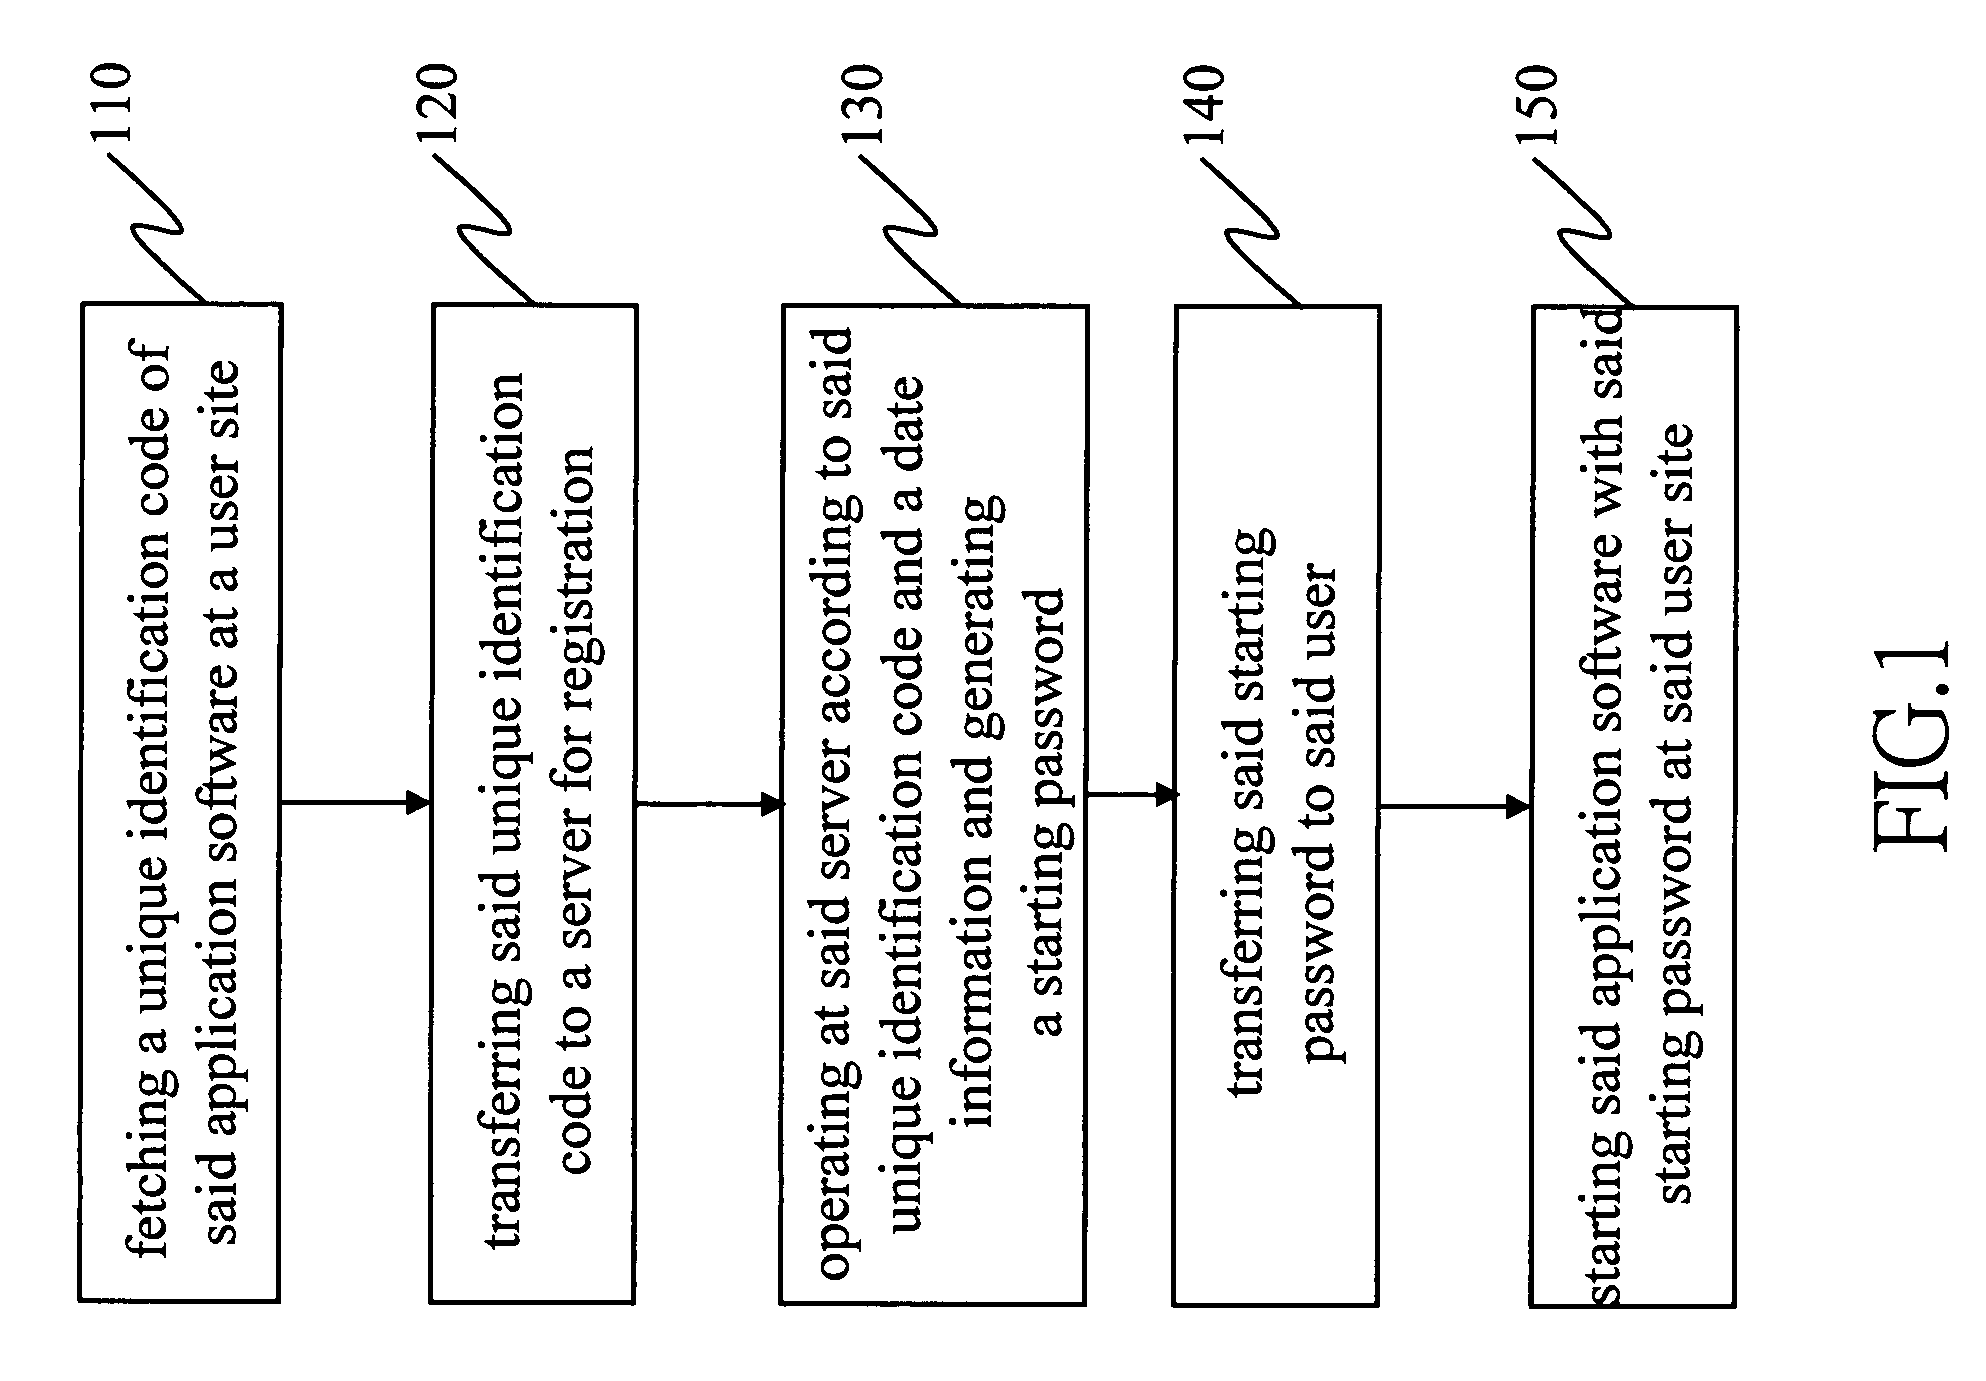 Encryption method of application software